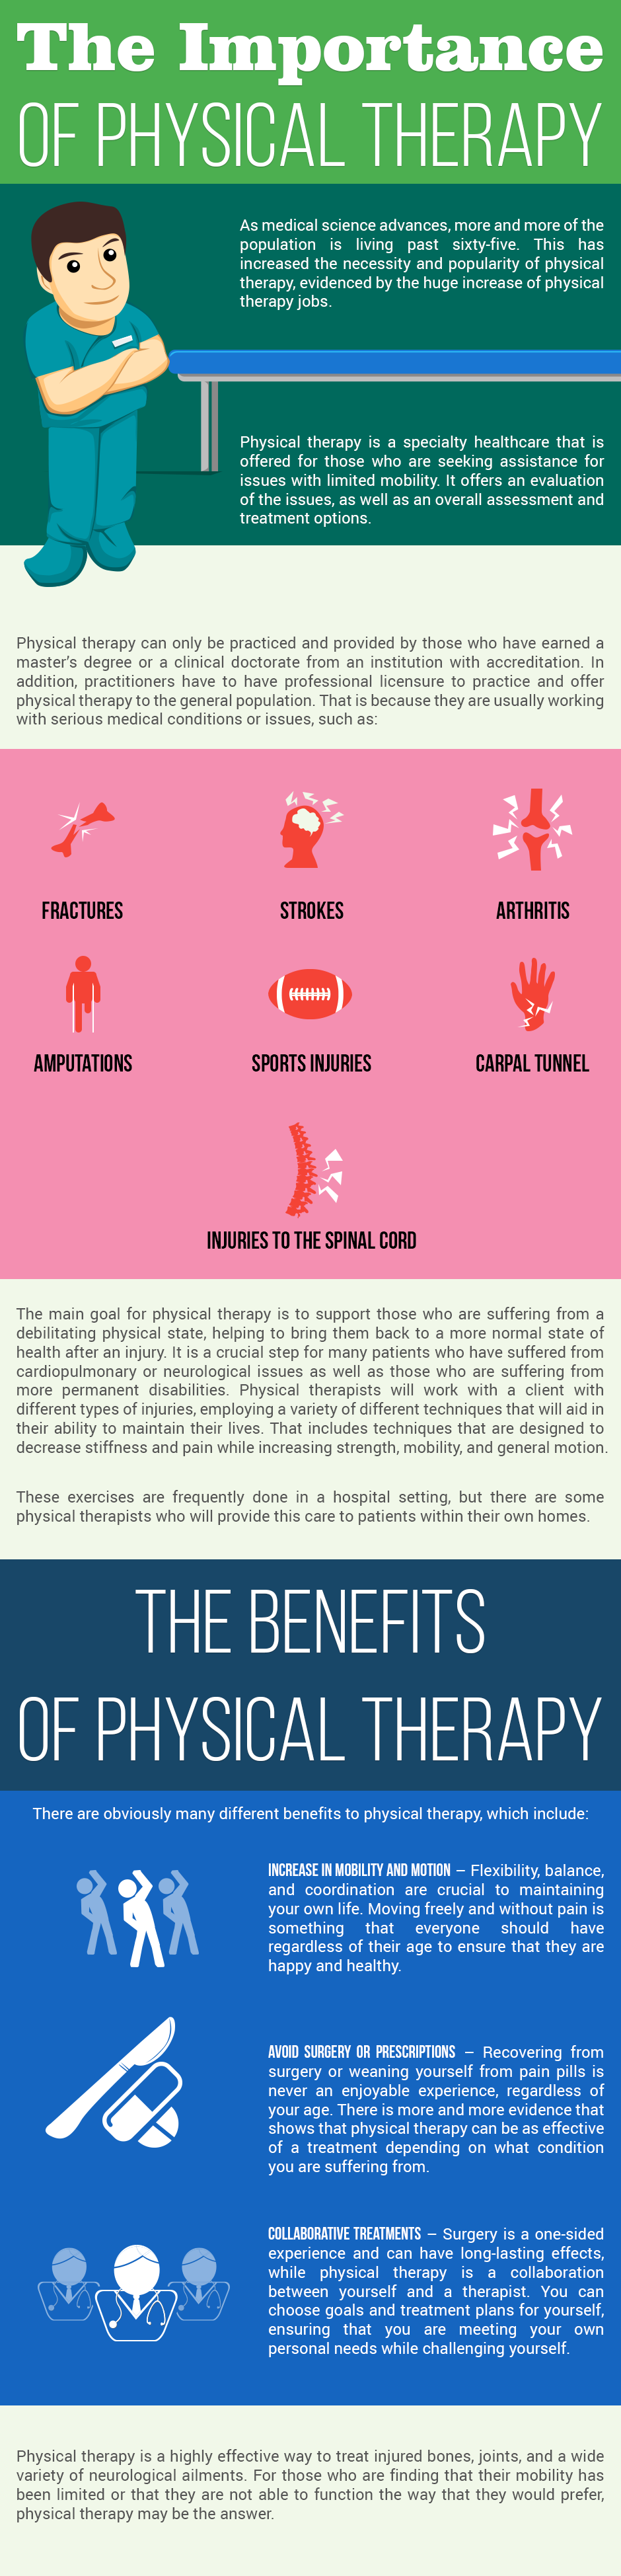 importance of physical therapy infographic